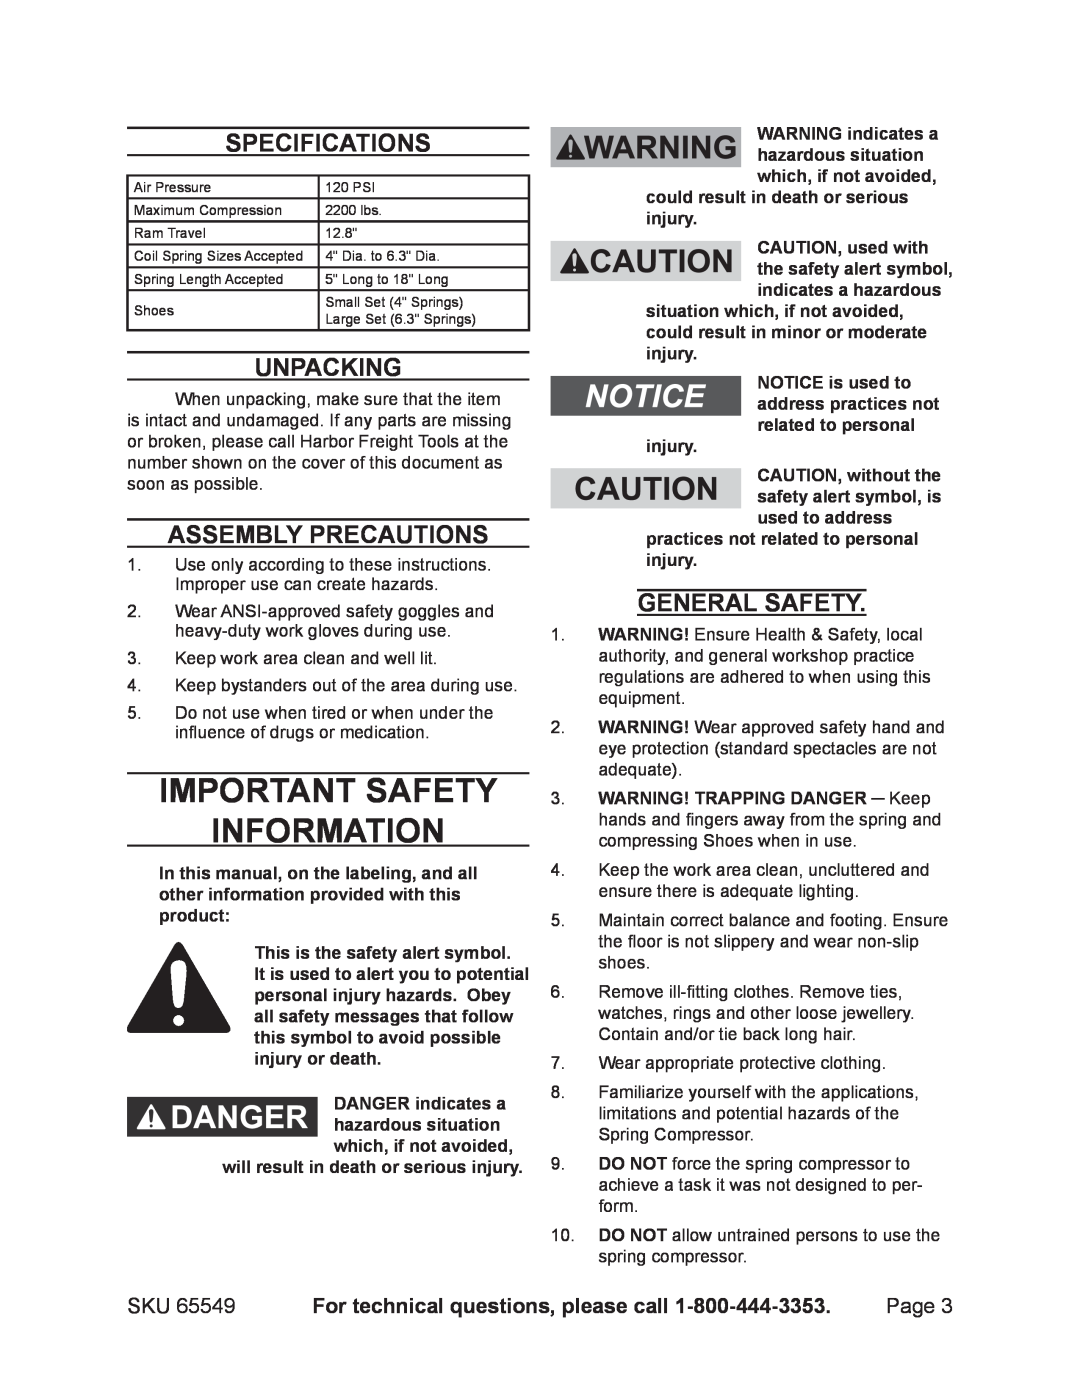 Harbor Freight Tools 65549 manual Important SAFETY Information, Page 